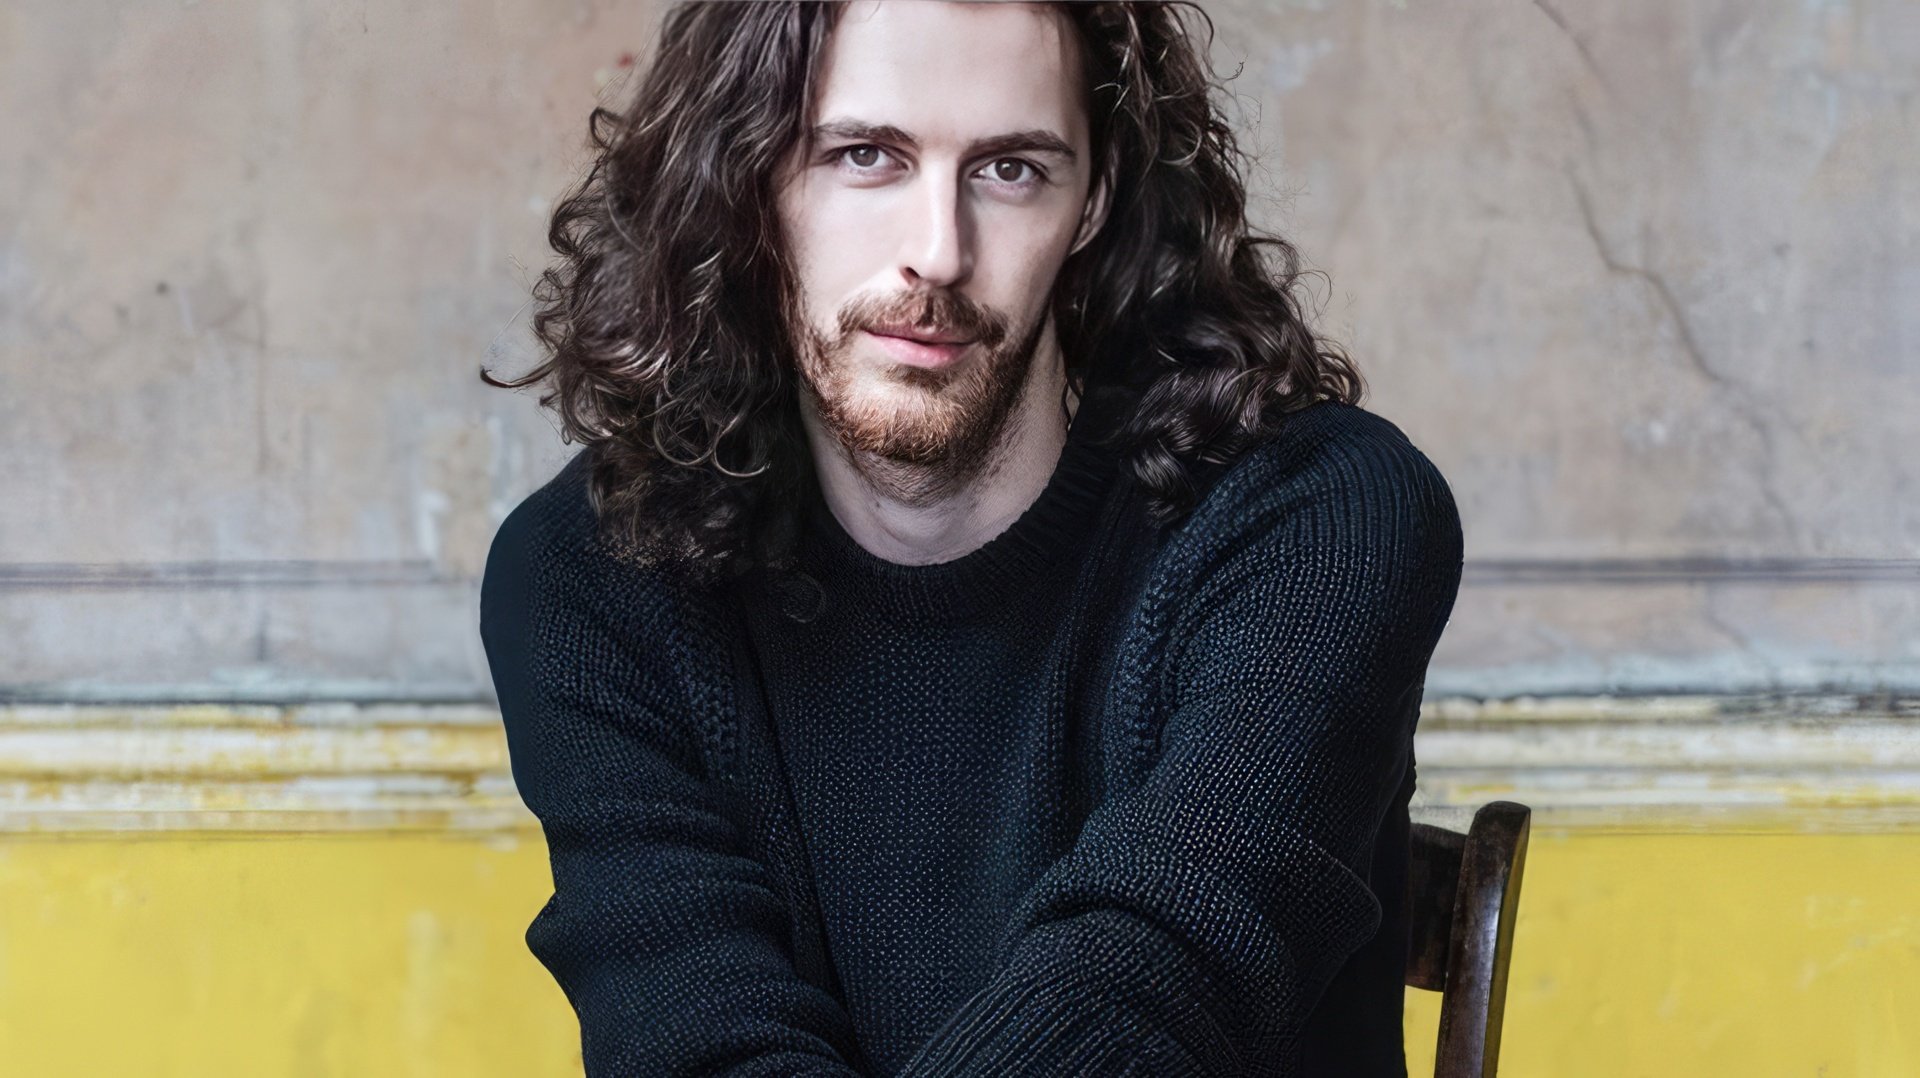 Andrew Hozier-Byrne is from Ireland